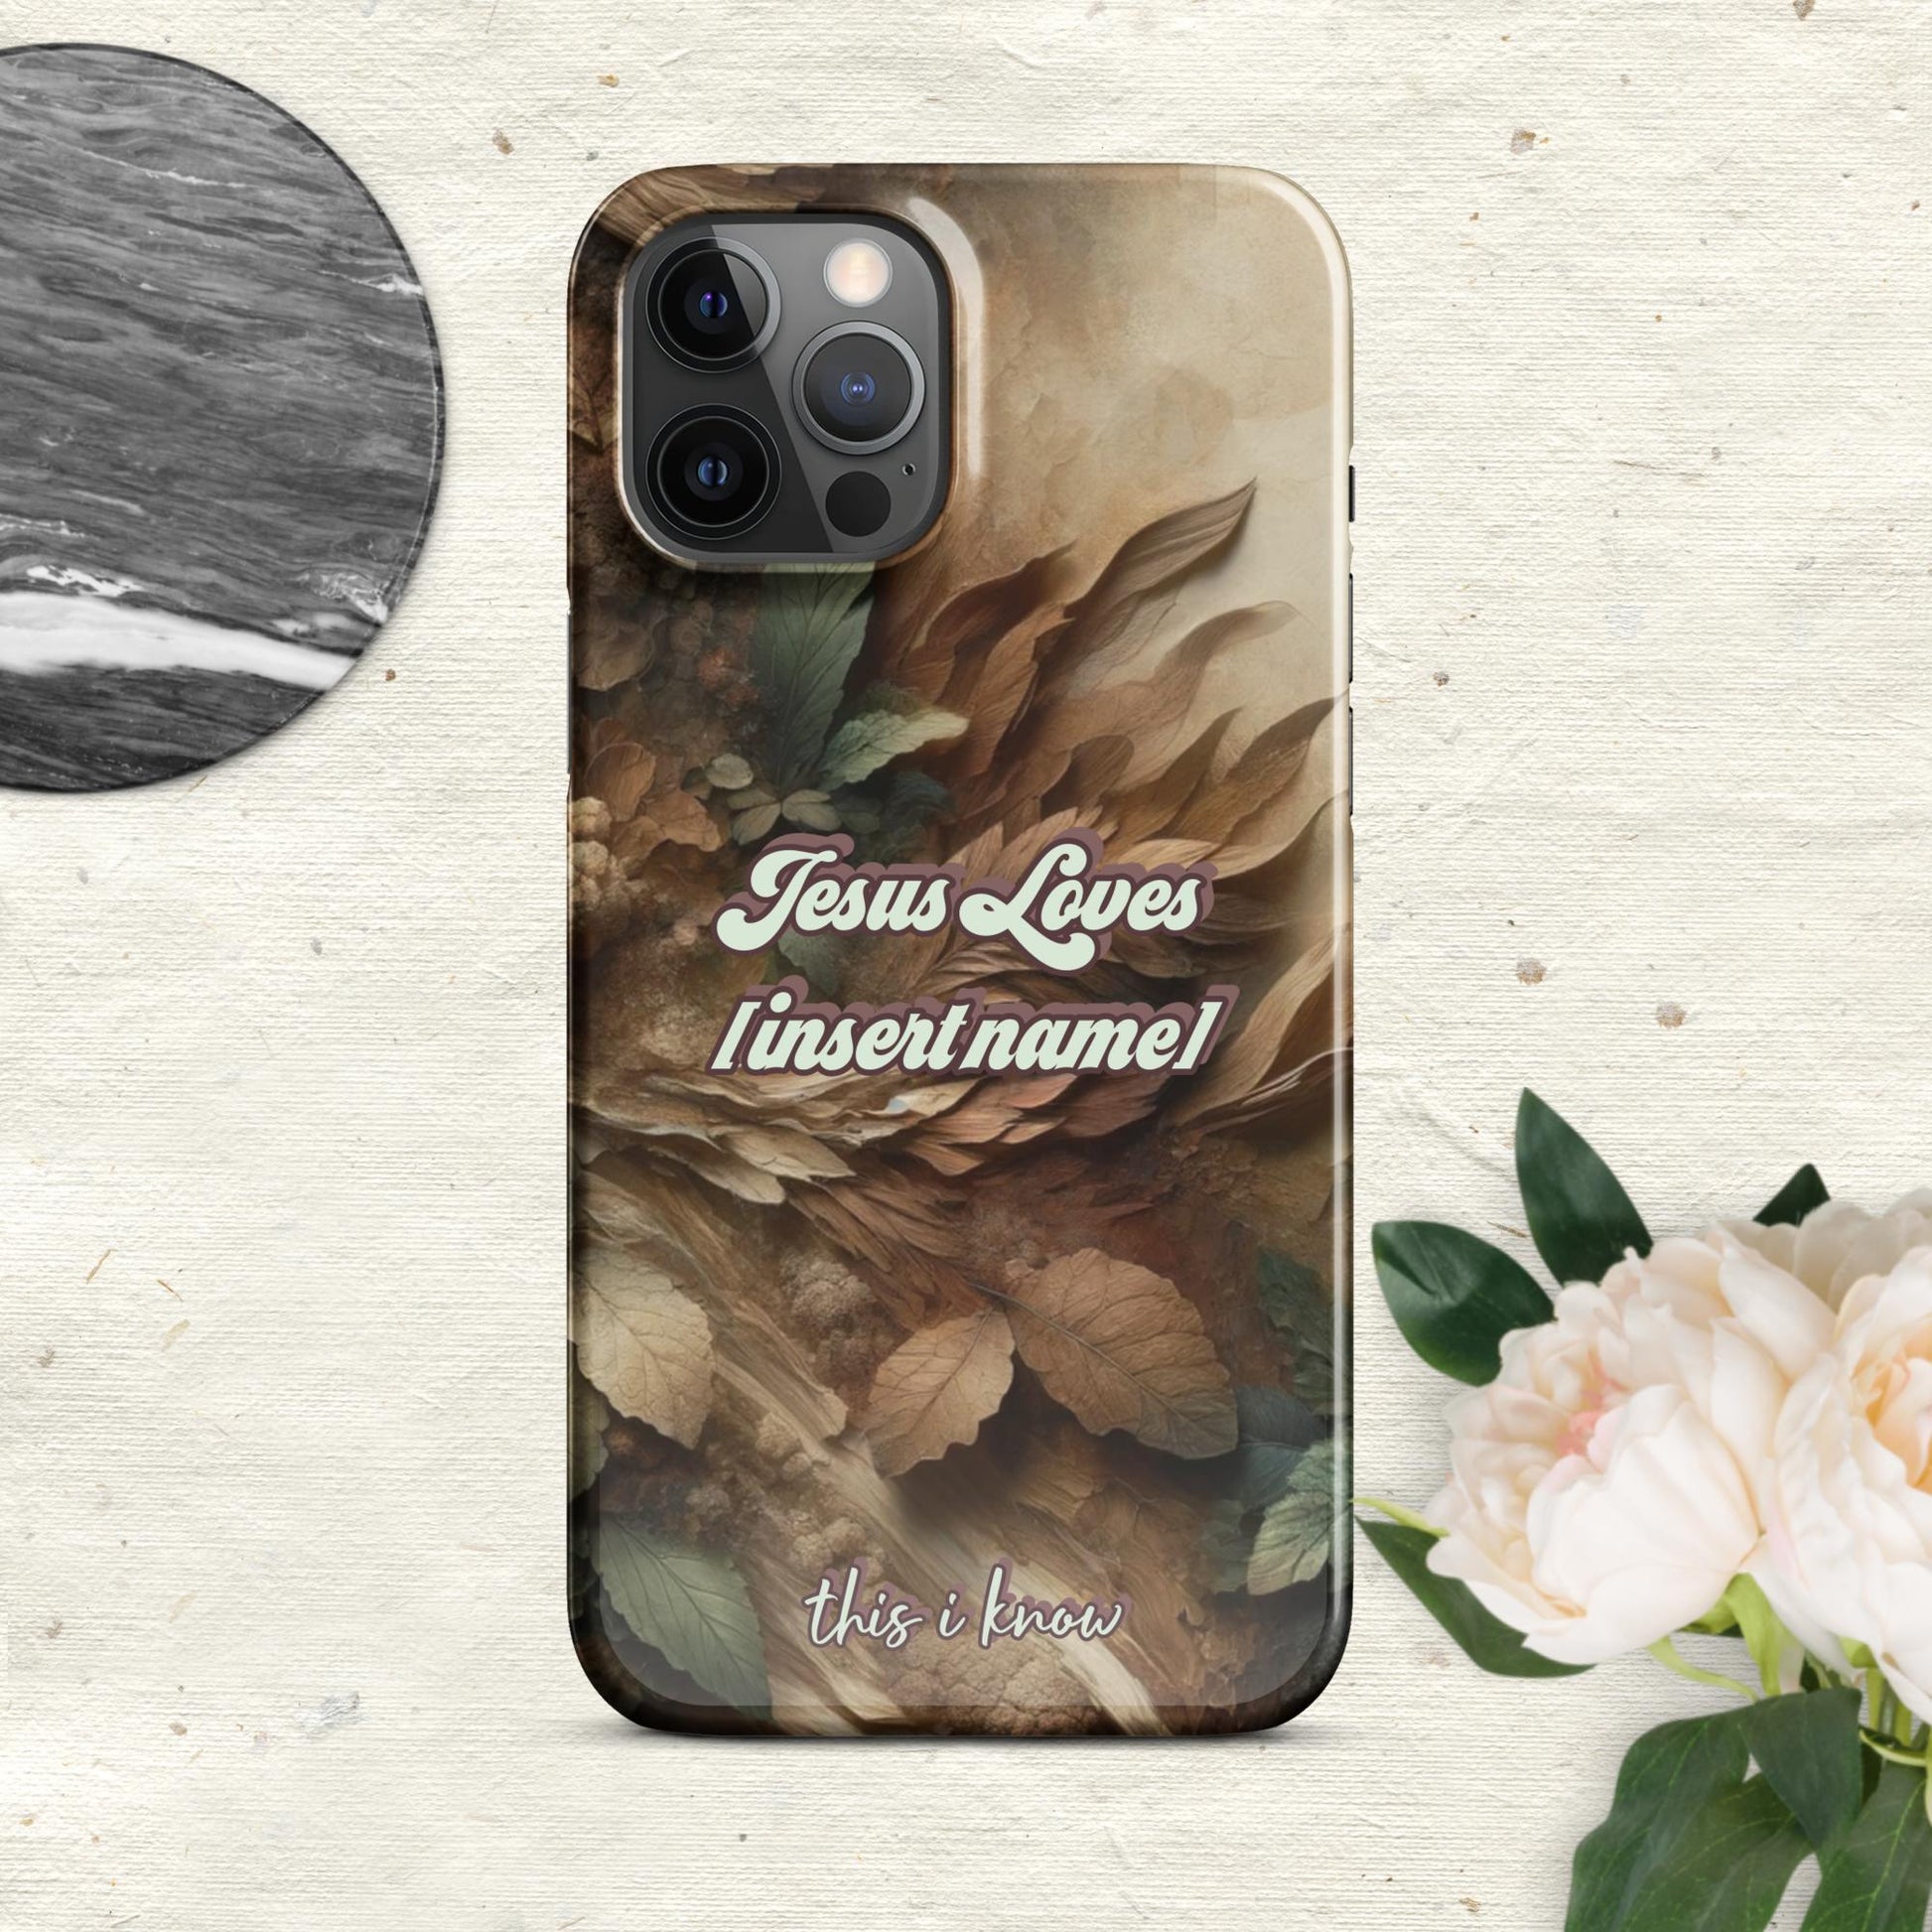 Trendyguard Glossy / iPhone 12 Pro Max Jesus Loves [insertname] This I Know | Custom Snap case for iPhone®